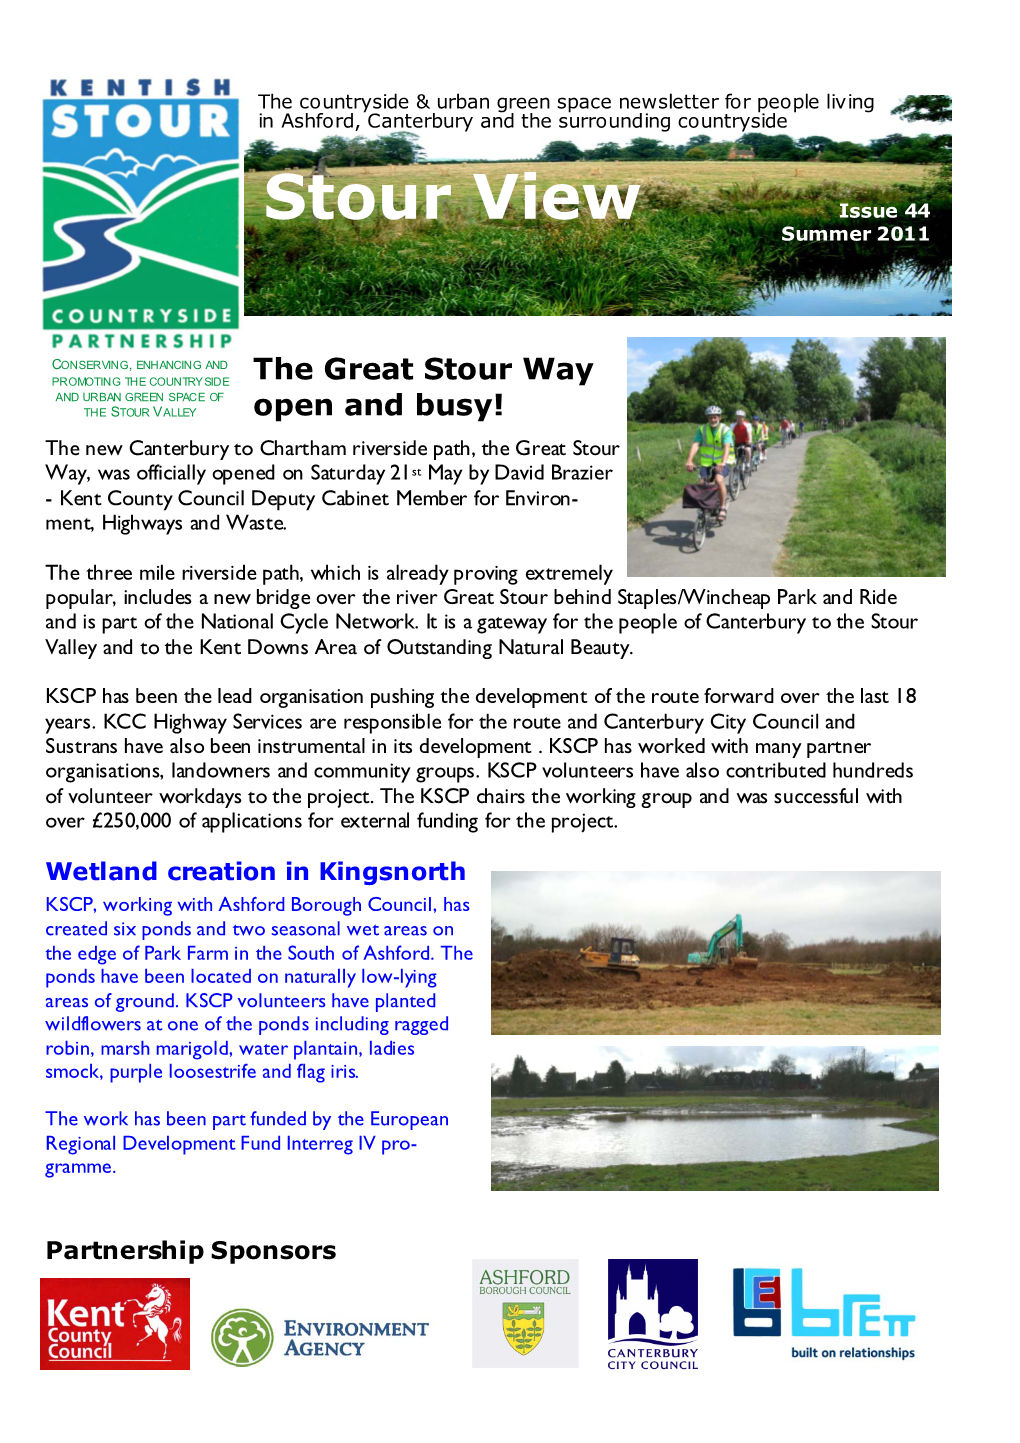 Stour View Issue 44 Summer 2011